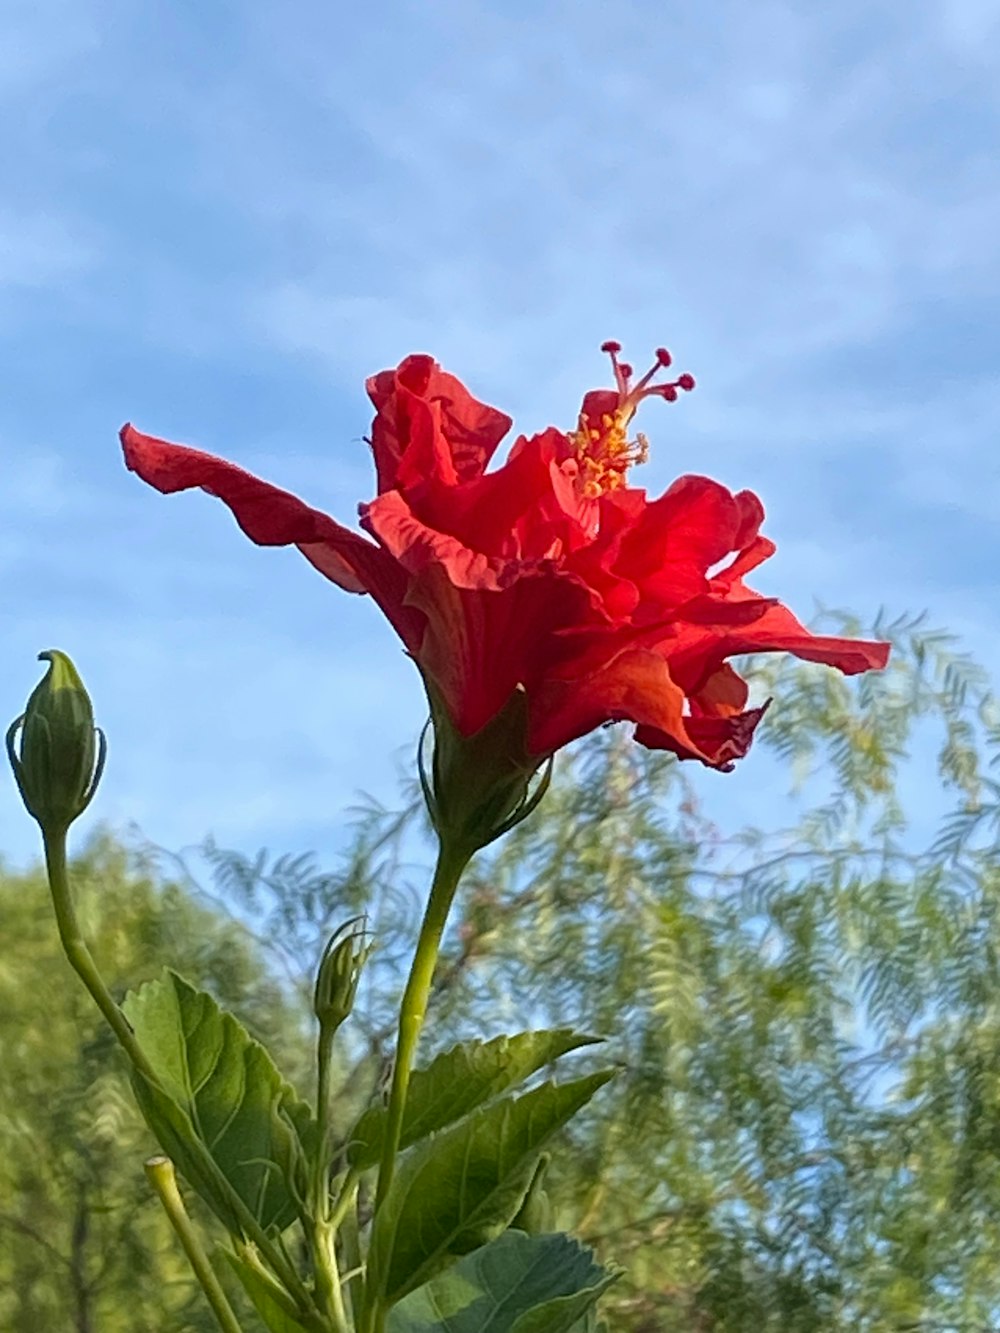 a red flower with green leaves in front of a blue sky